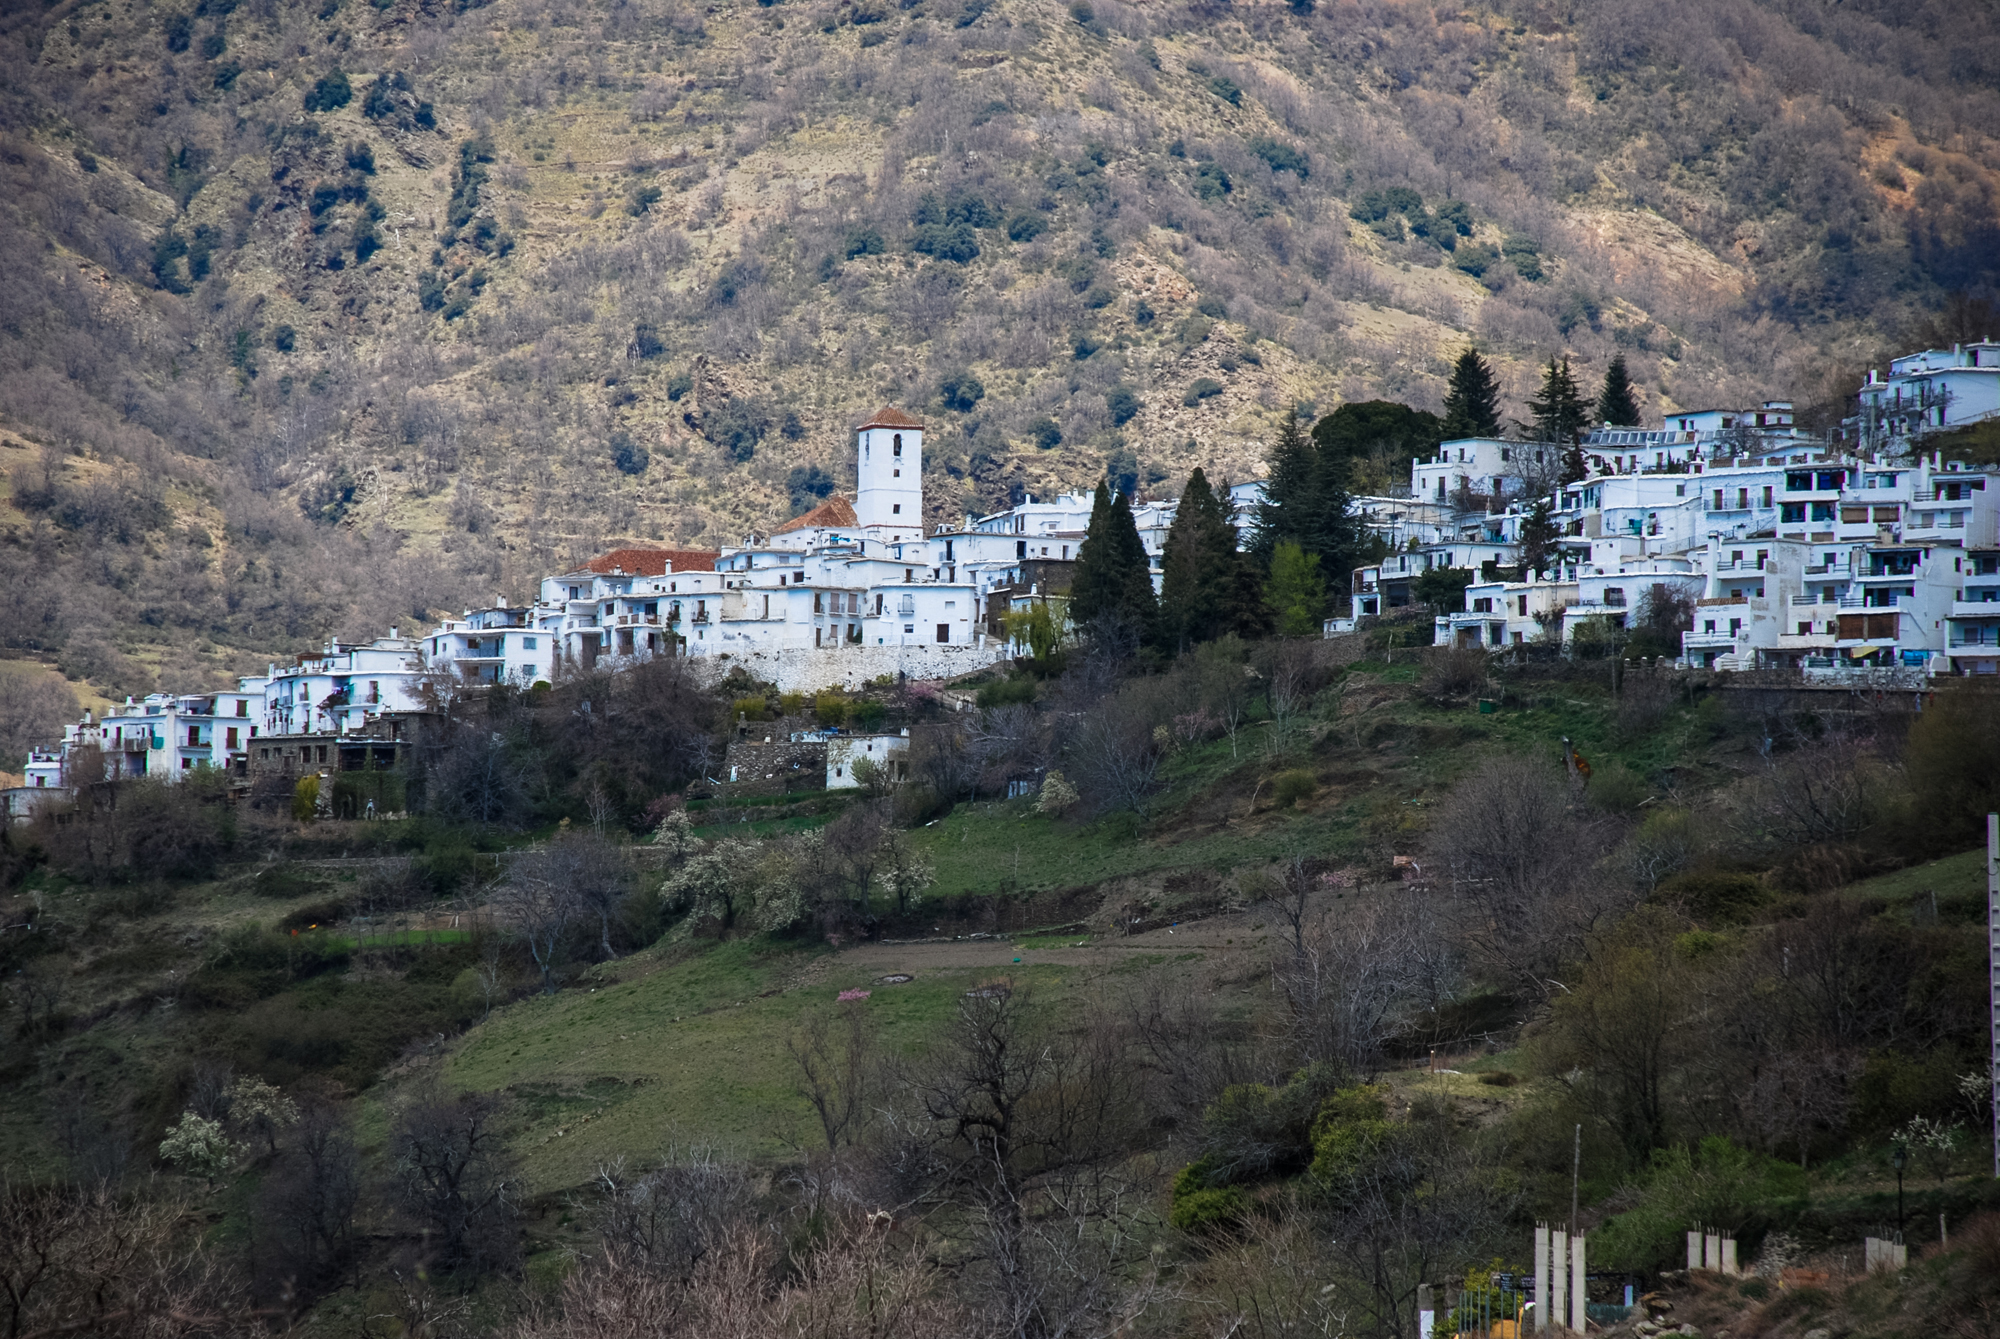 A typical Andalusian white-whashed mountain village.